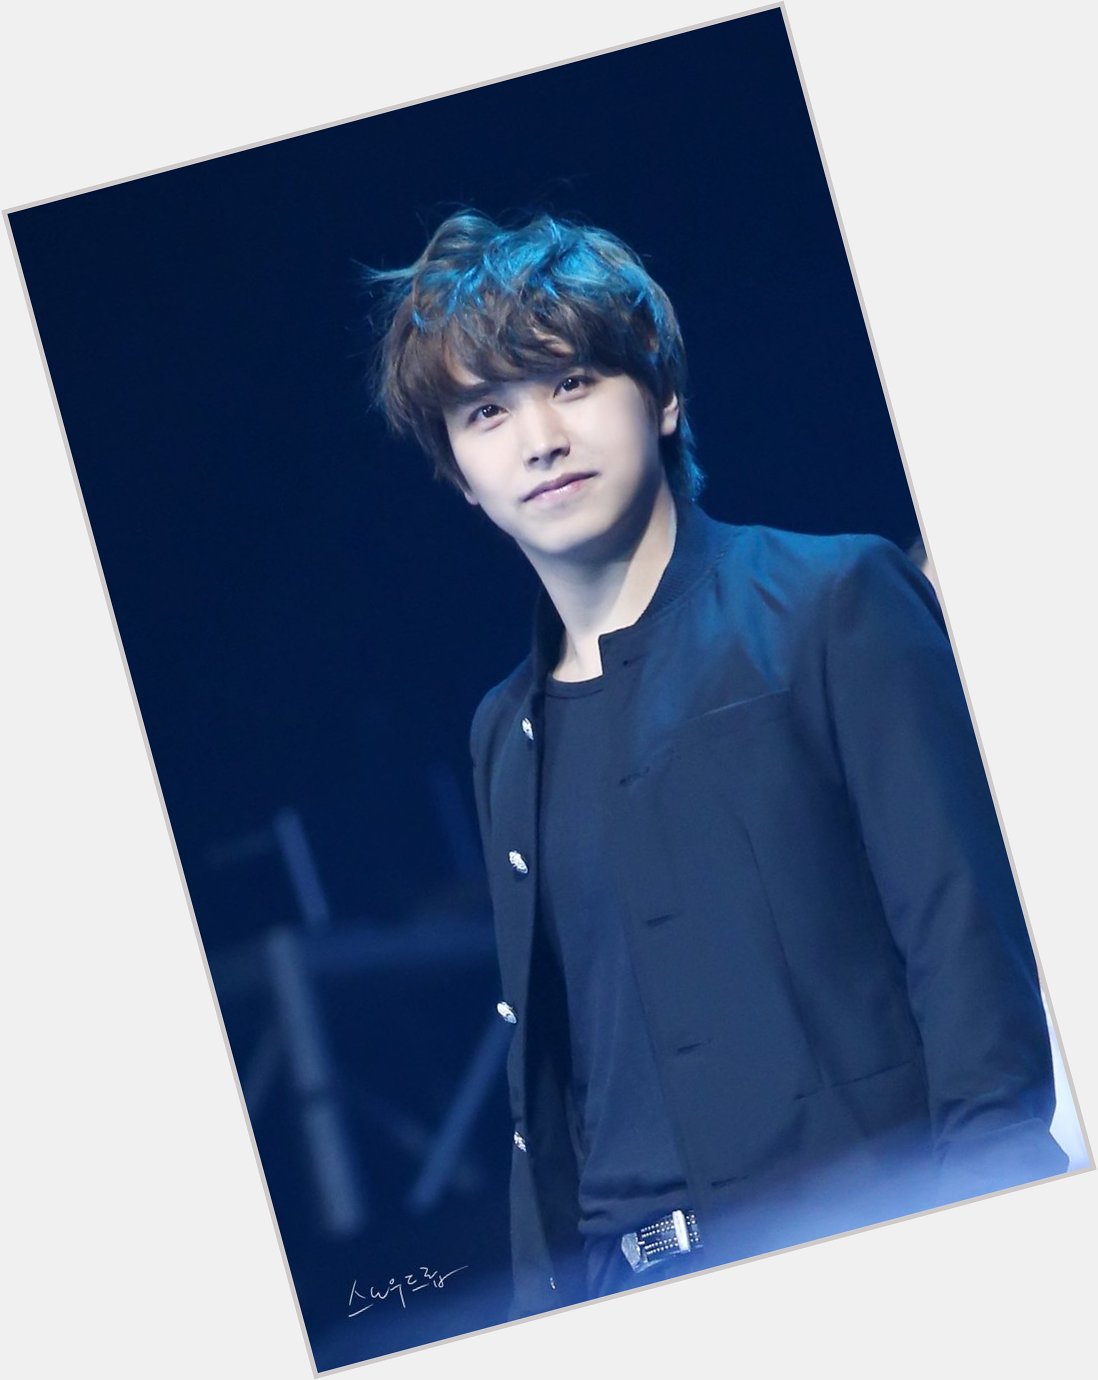  The sun of my life, my day brightens up by think of you. Happy Bday, Lee Sungmin 